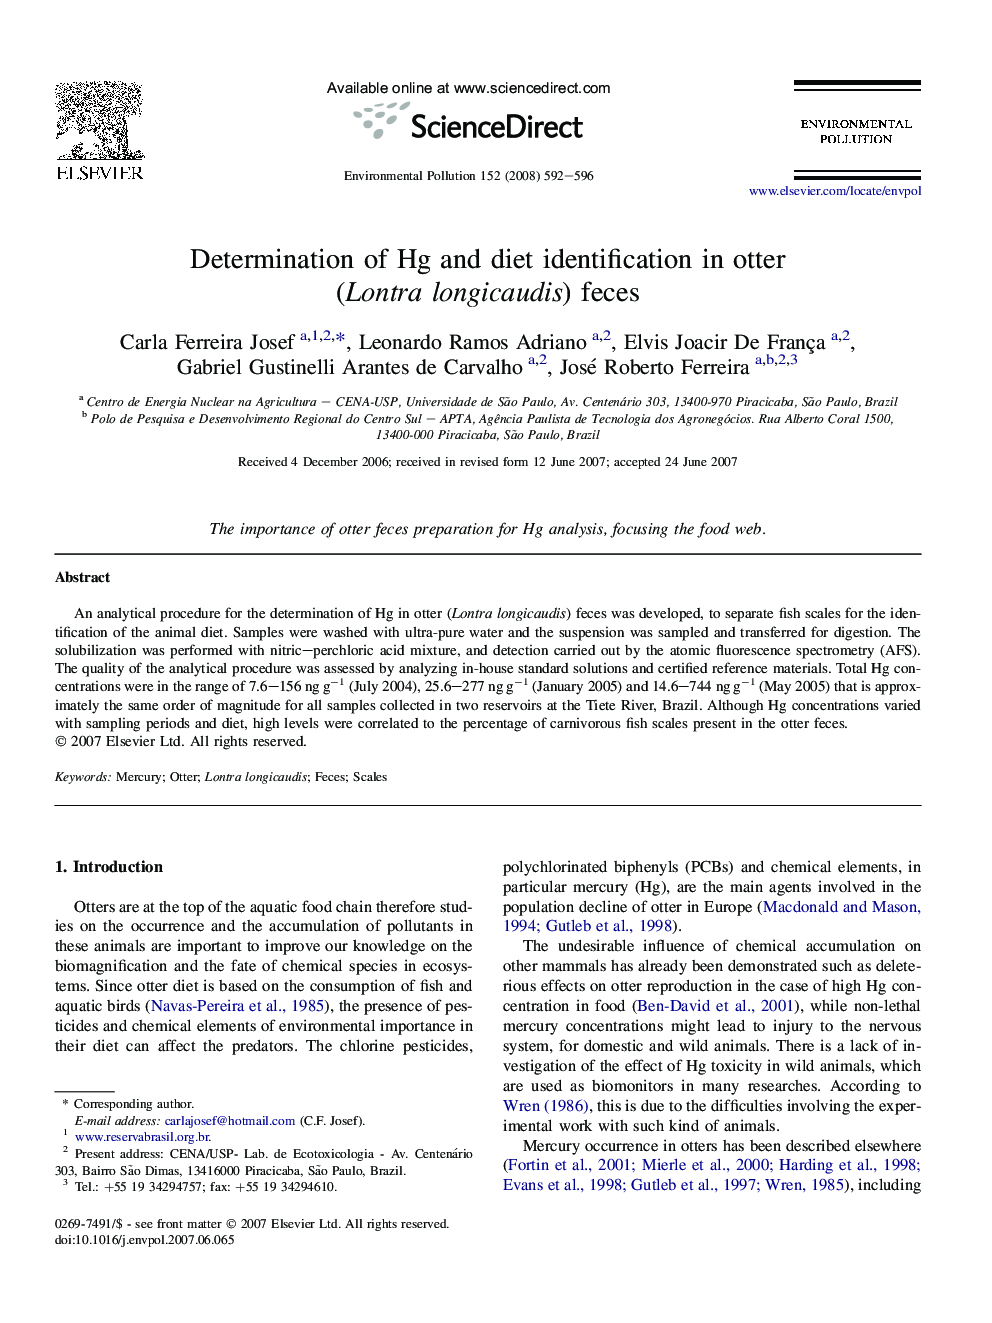 Determination of Hg and diet identification in otter (Lontra longicaudis) feces